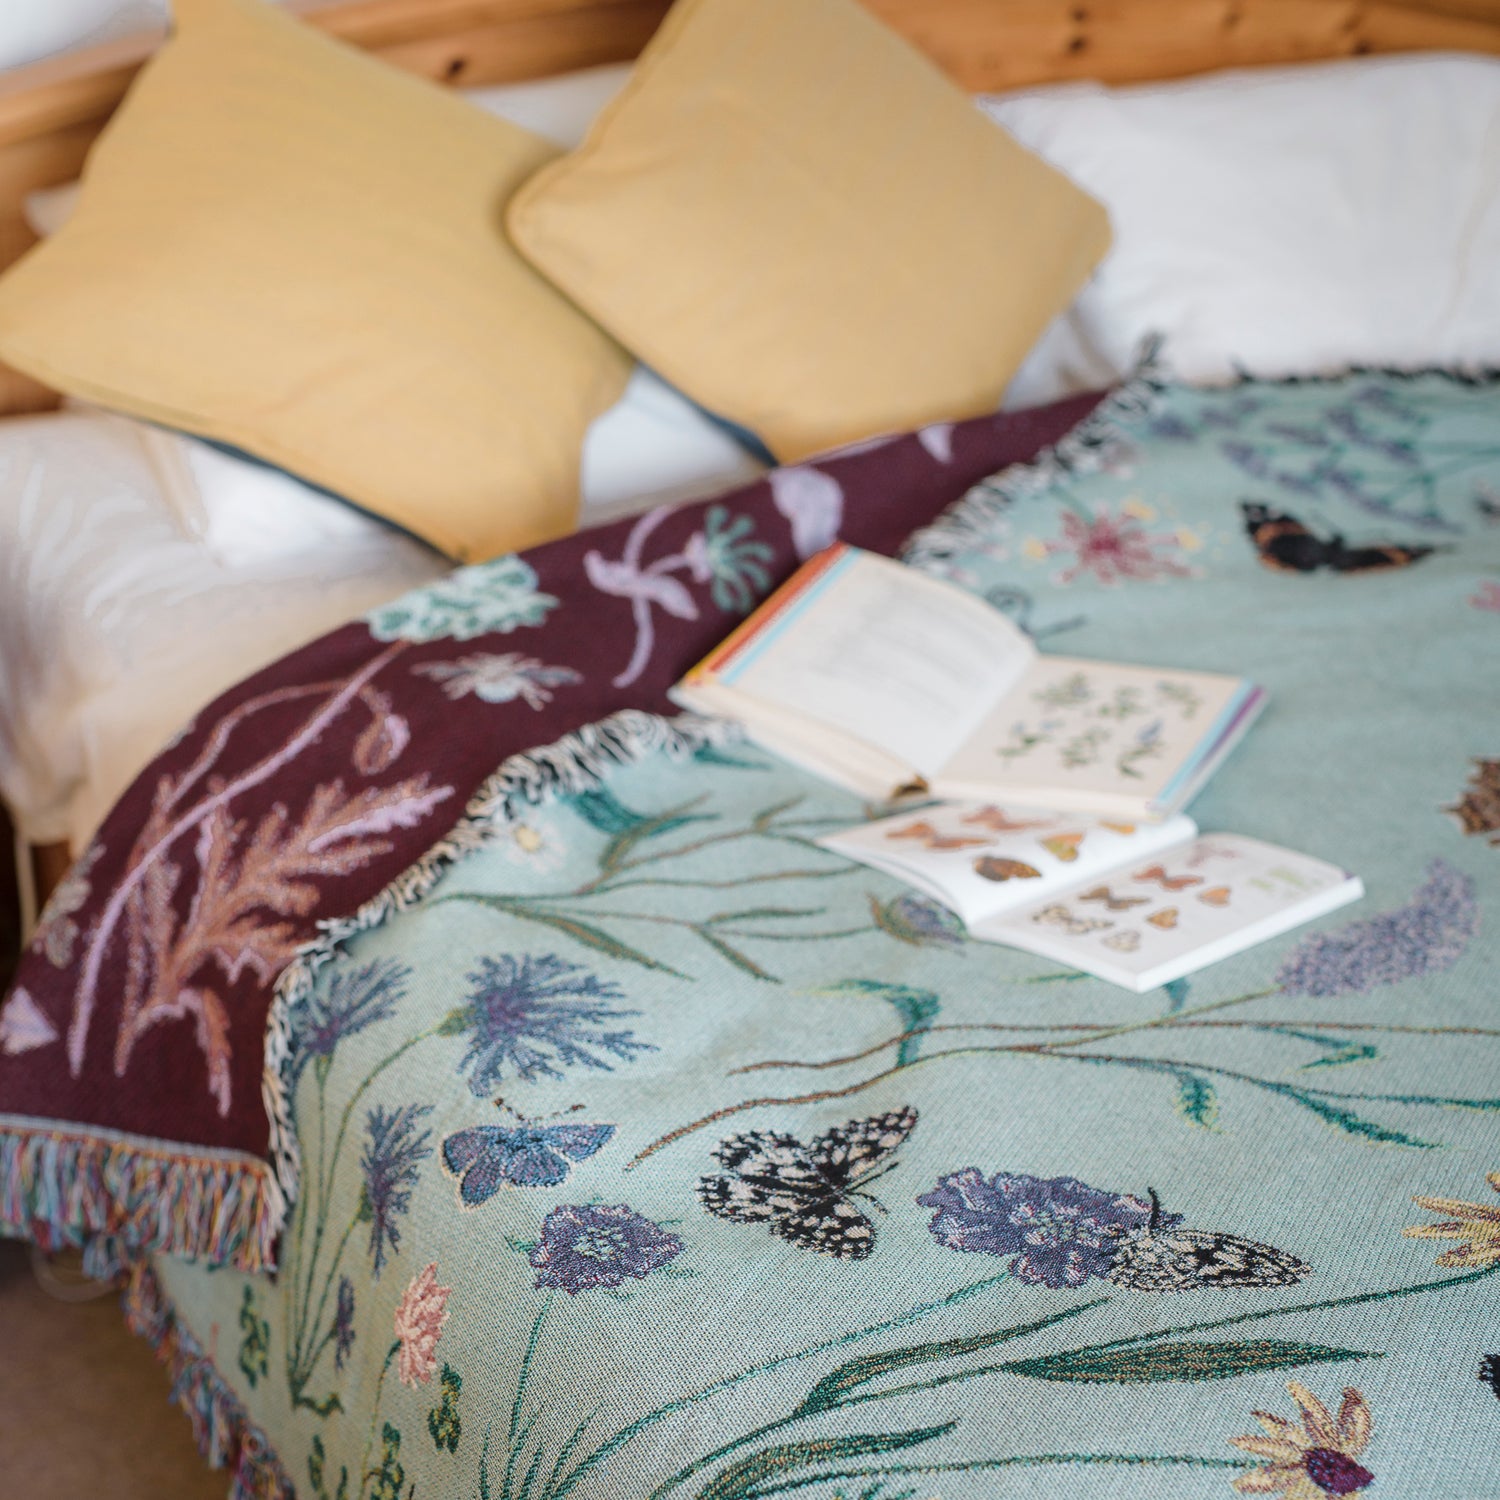 sage green woven blanket with butterflies and wildflowers covering a bed with gold cushions